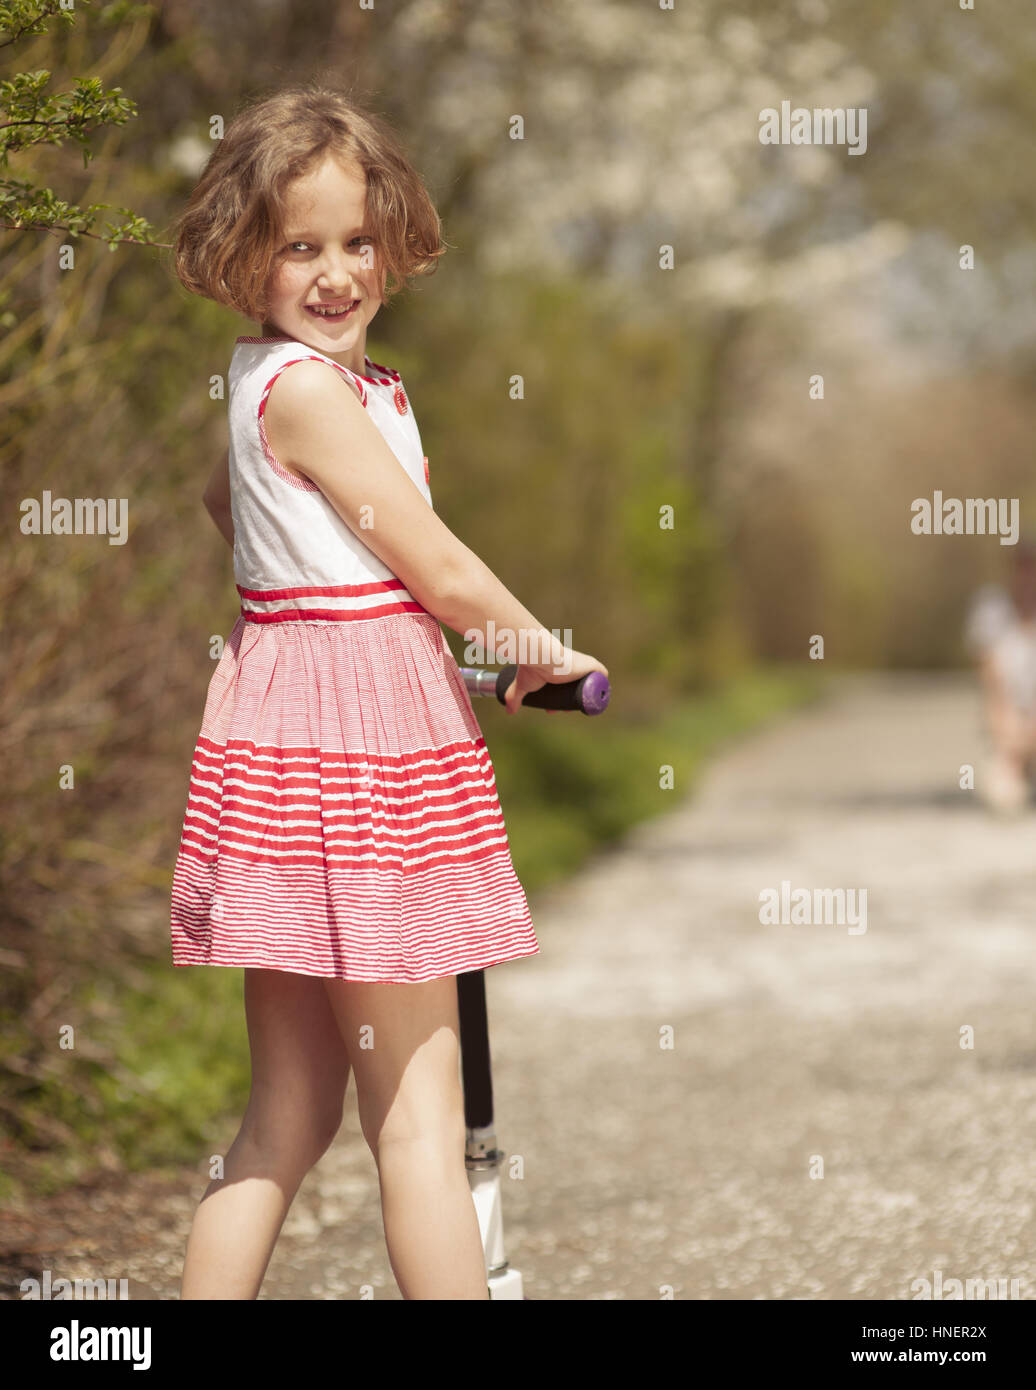 Young girl riding scooter in park away from camera to mother Stock Photo